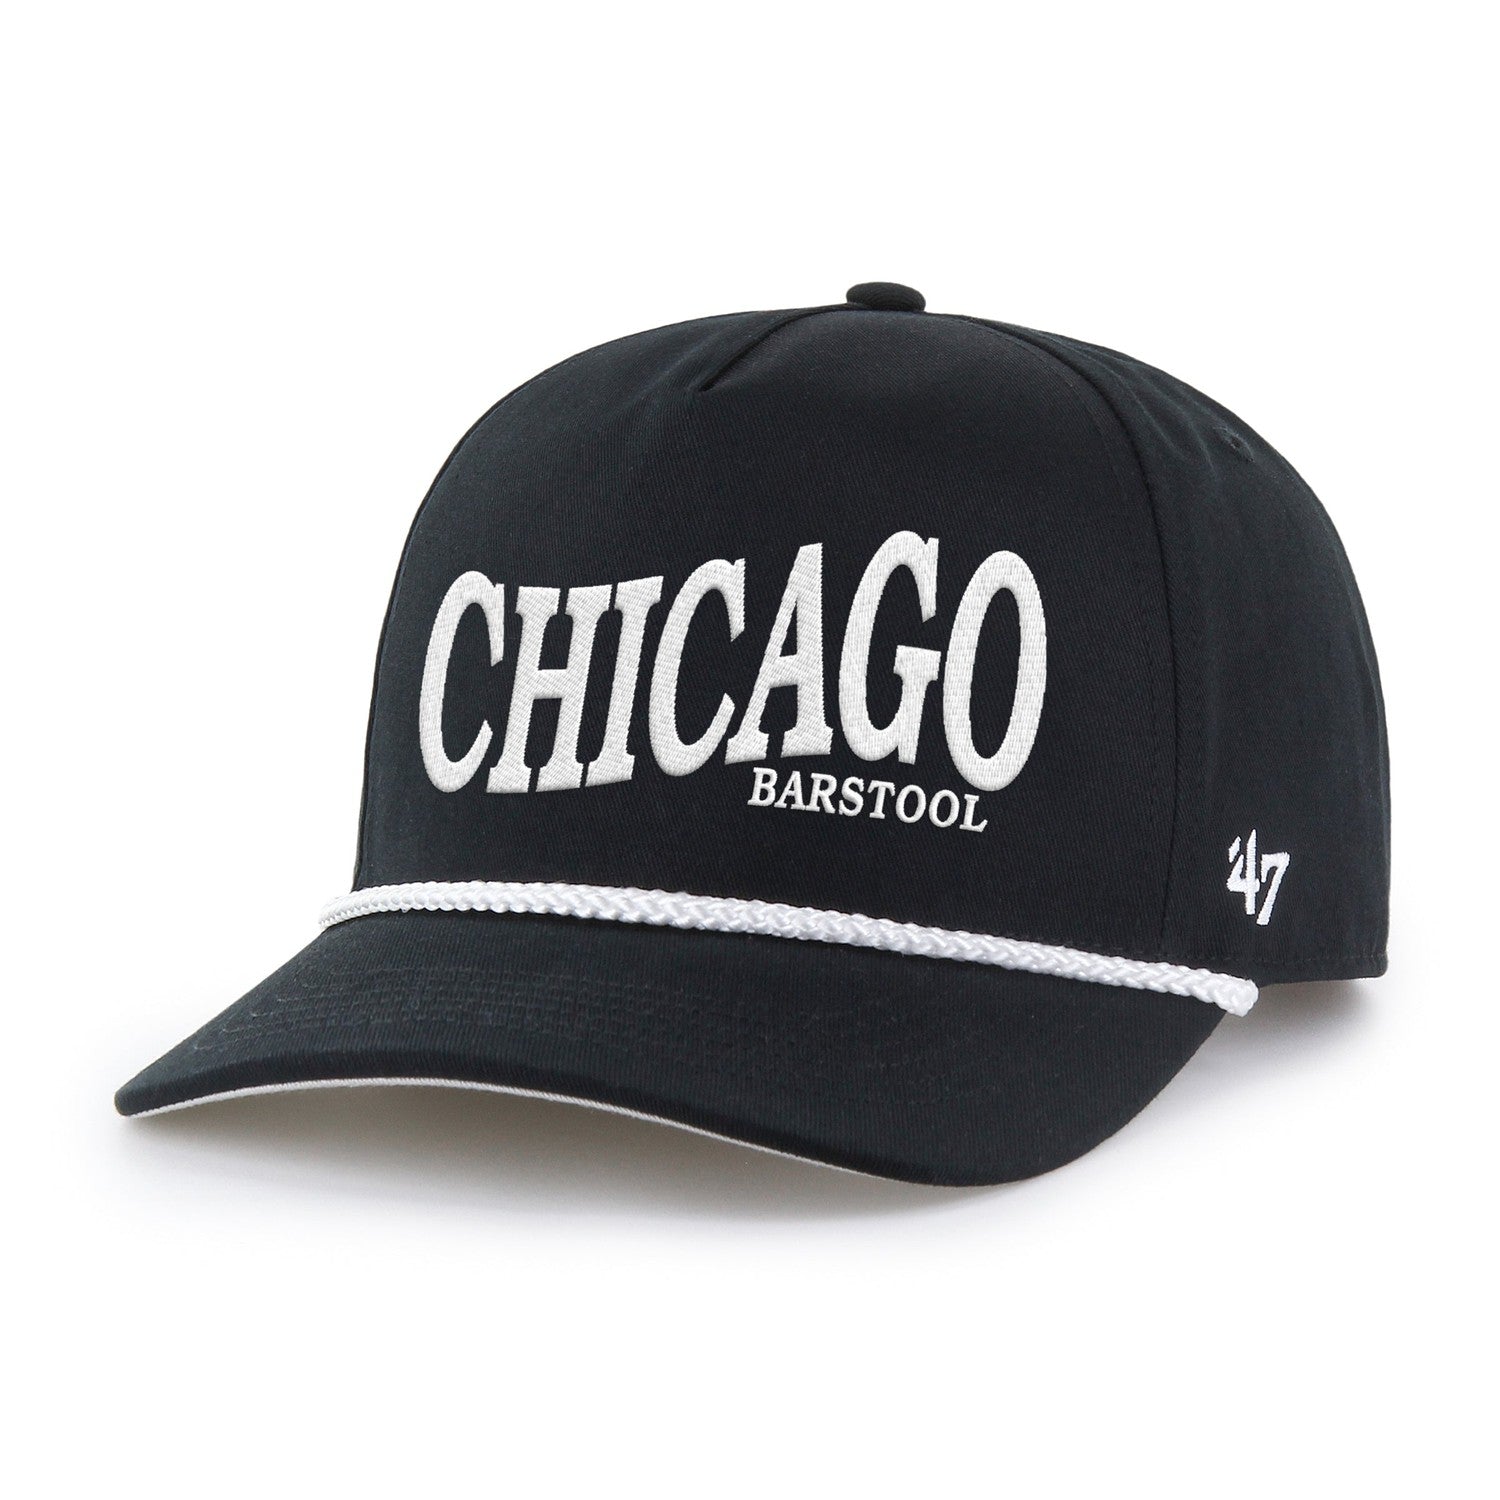 Barstool Chicago x '47 HITCH Rope Hat